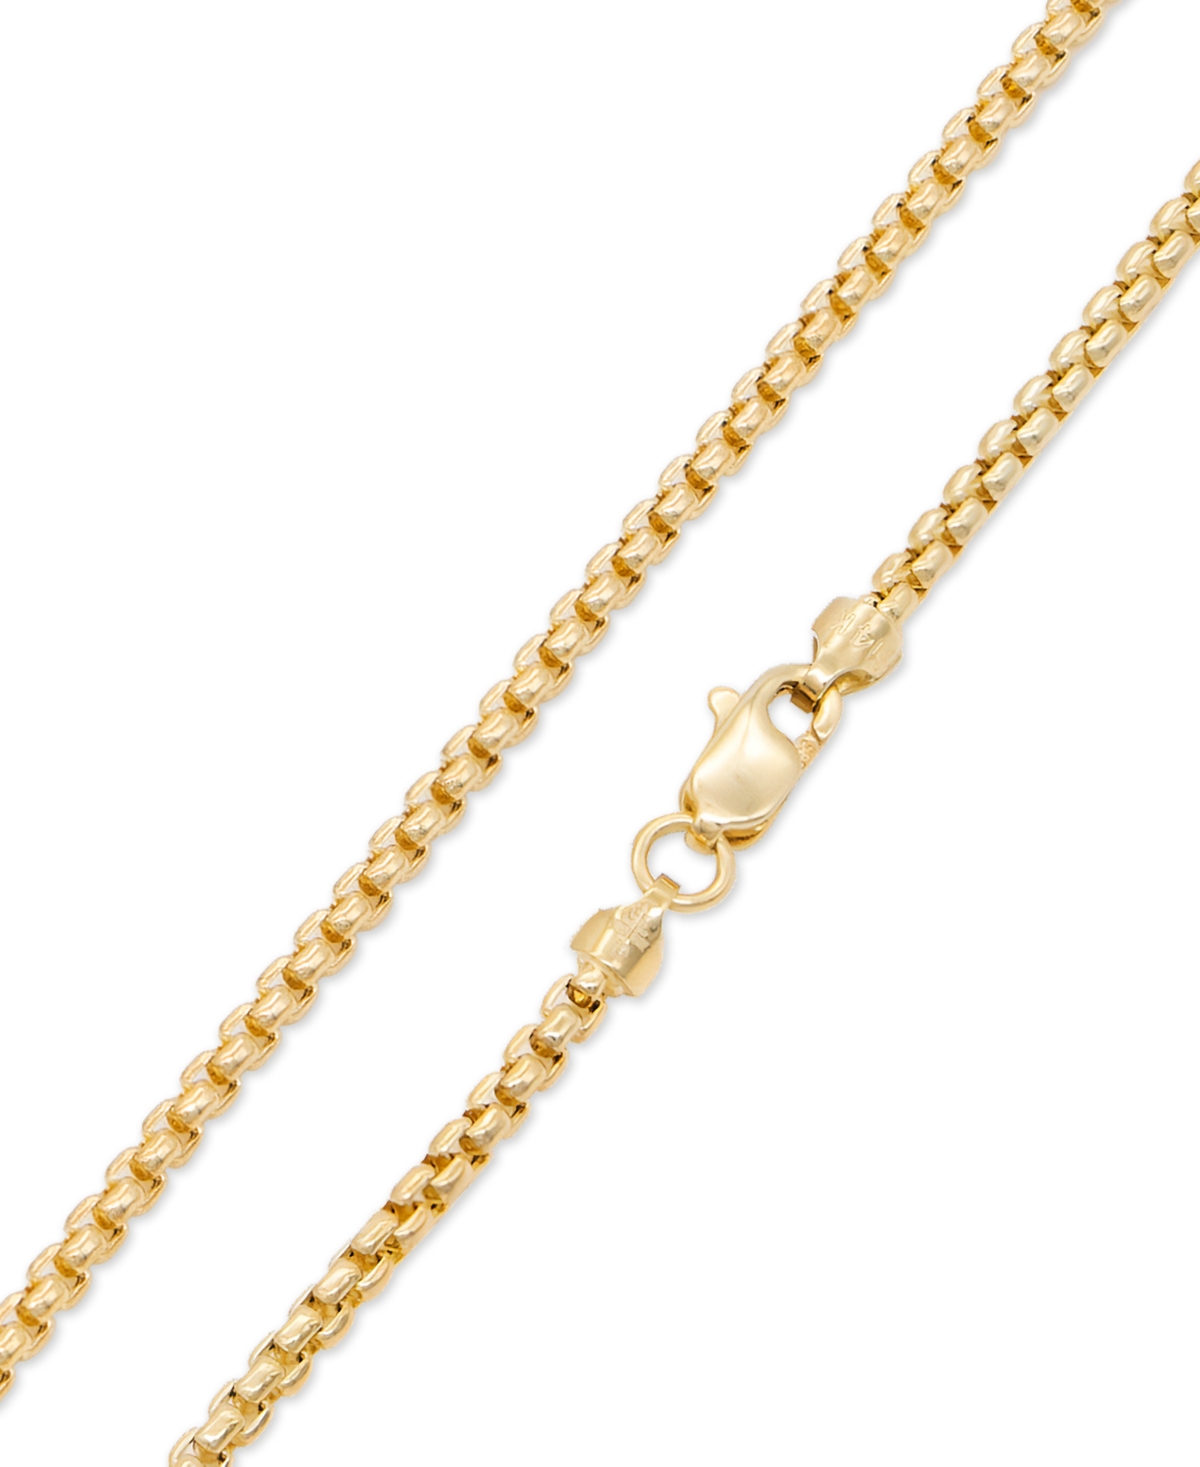 14K Gold Box Round 2mm Chain Bracelet, 8.0", approx. 2.0grams - Gold